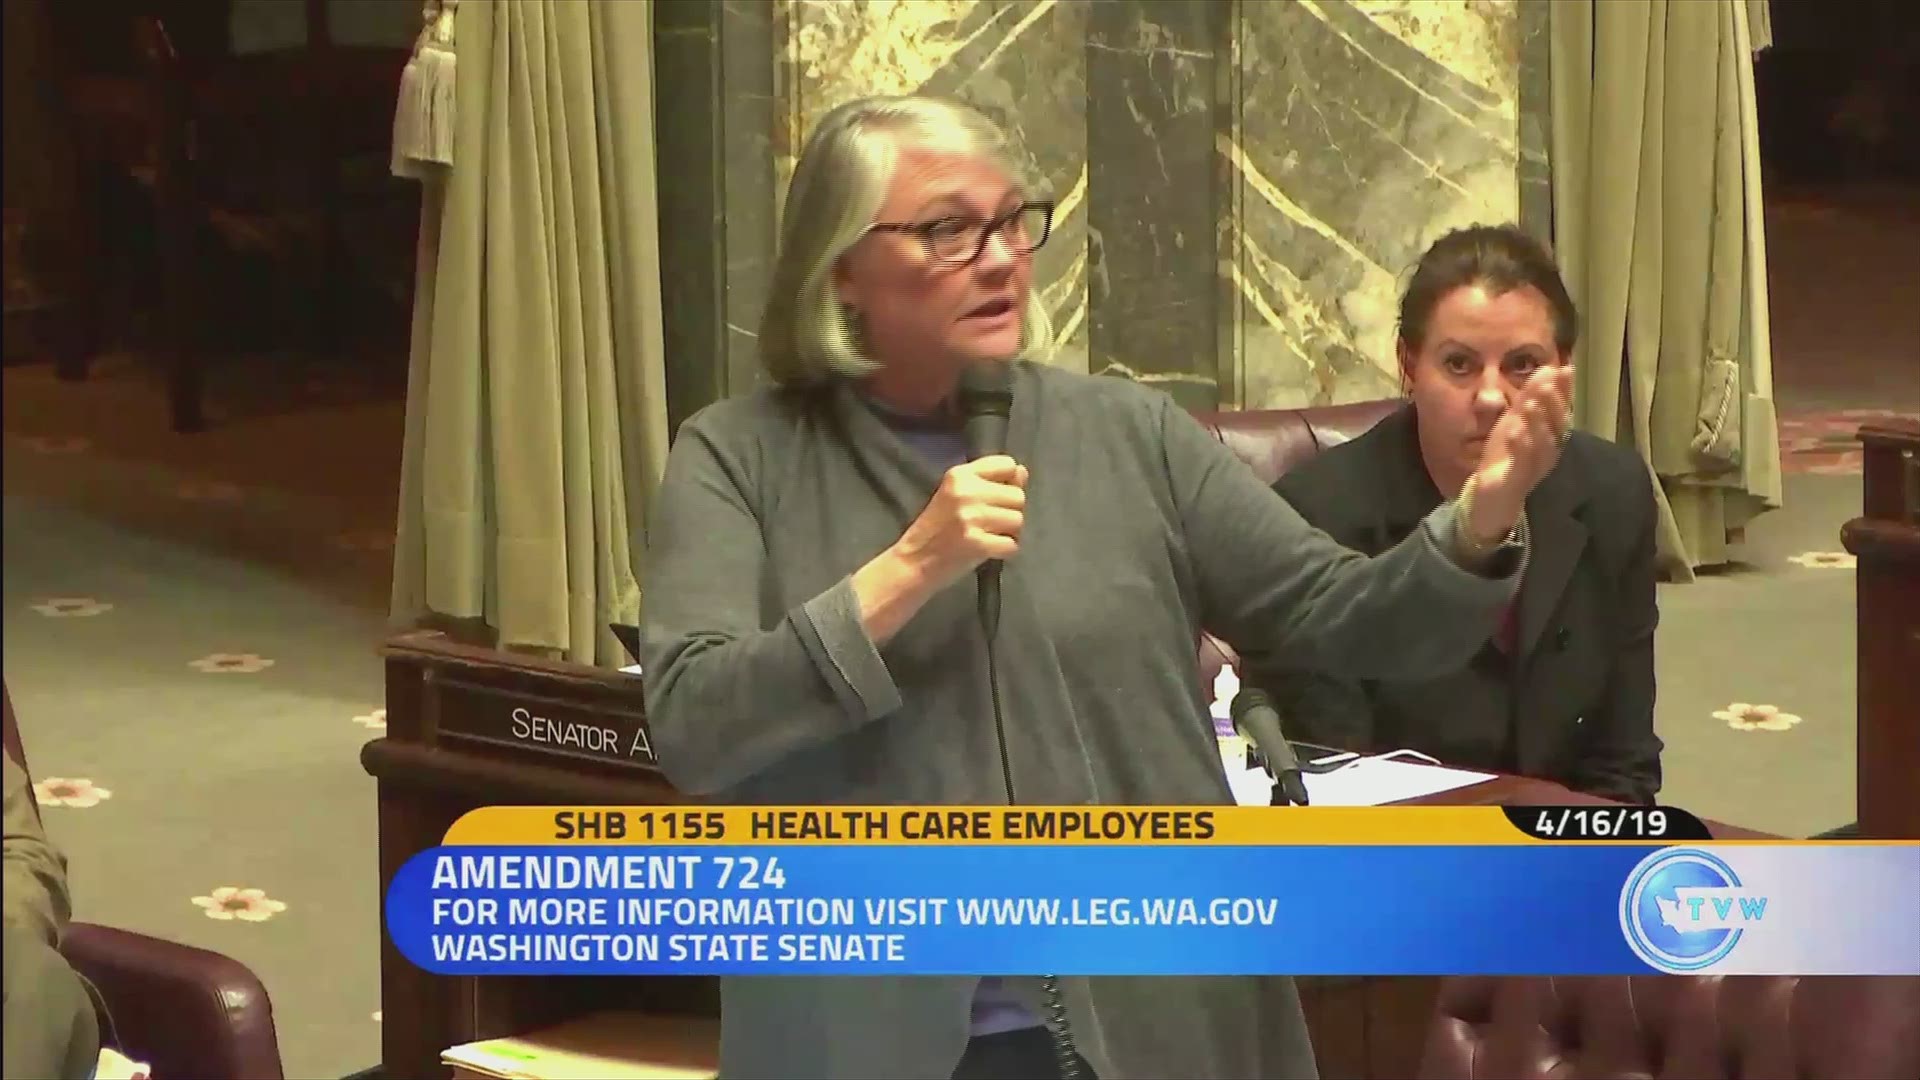 "I would submit to you that those (small hospital) nurses probably do get breaks," Walsh said. "They probably play cards for a considerable amount of the day."